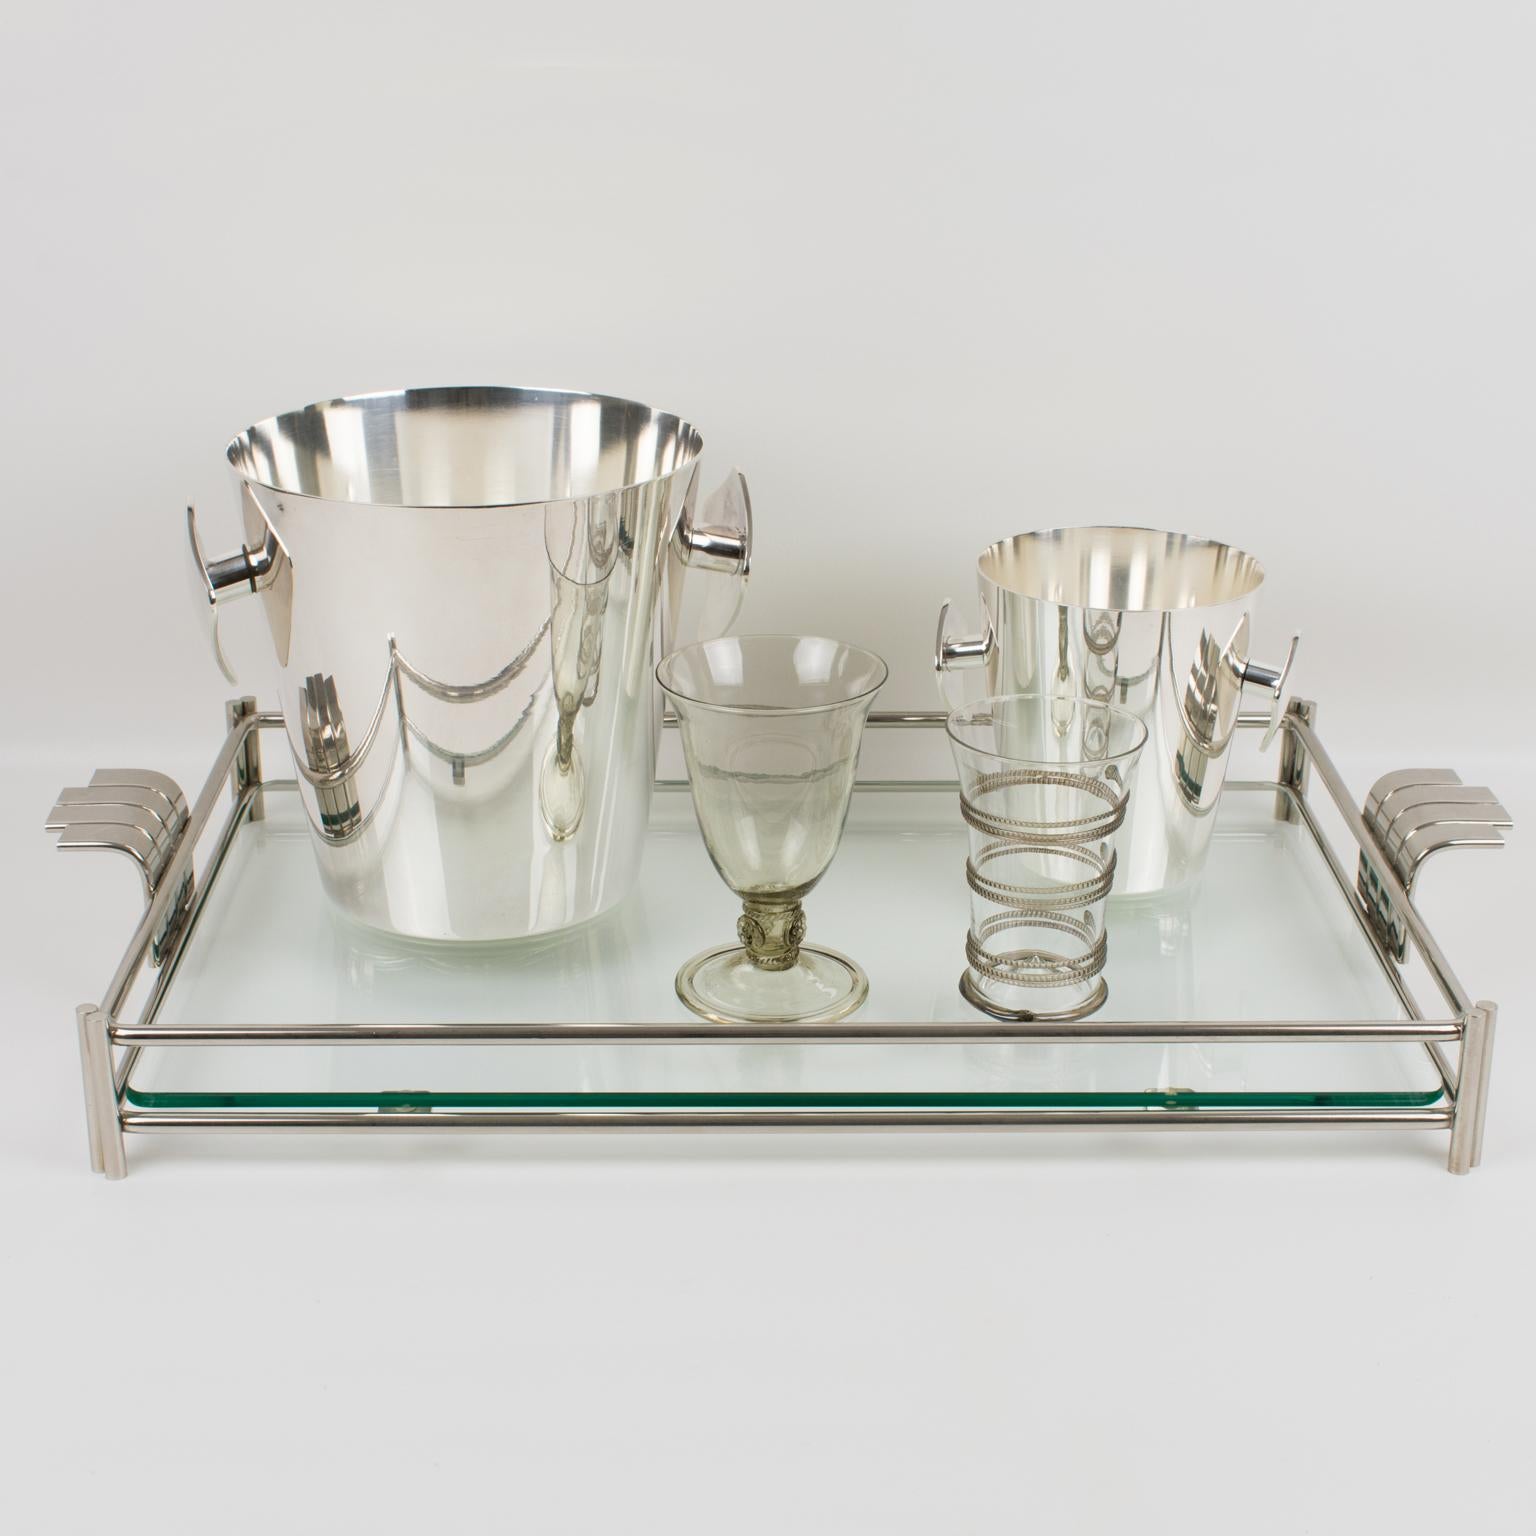 Late 20th Century Christian Dior Barware Silver Plate and Glass Tray